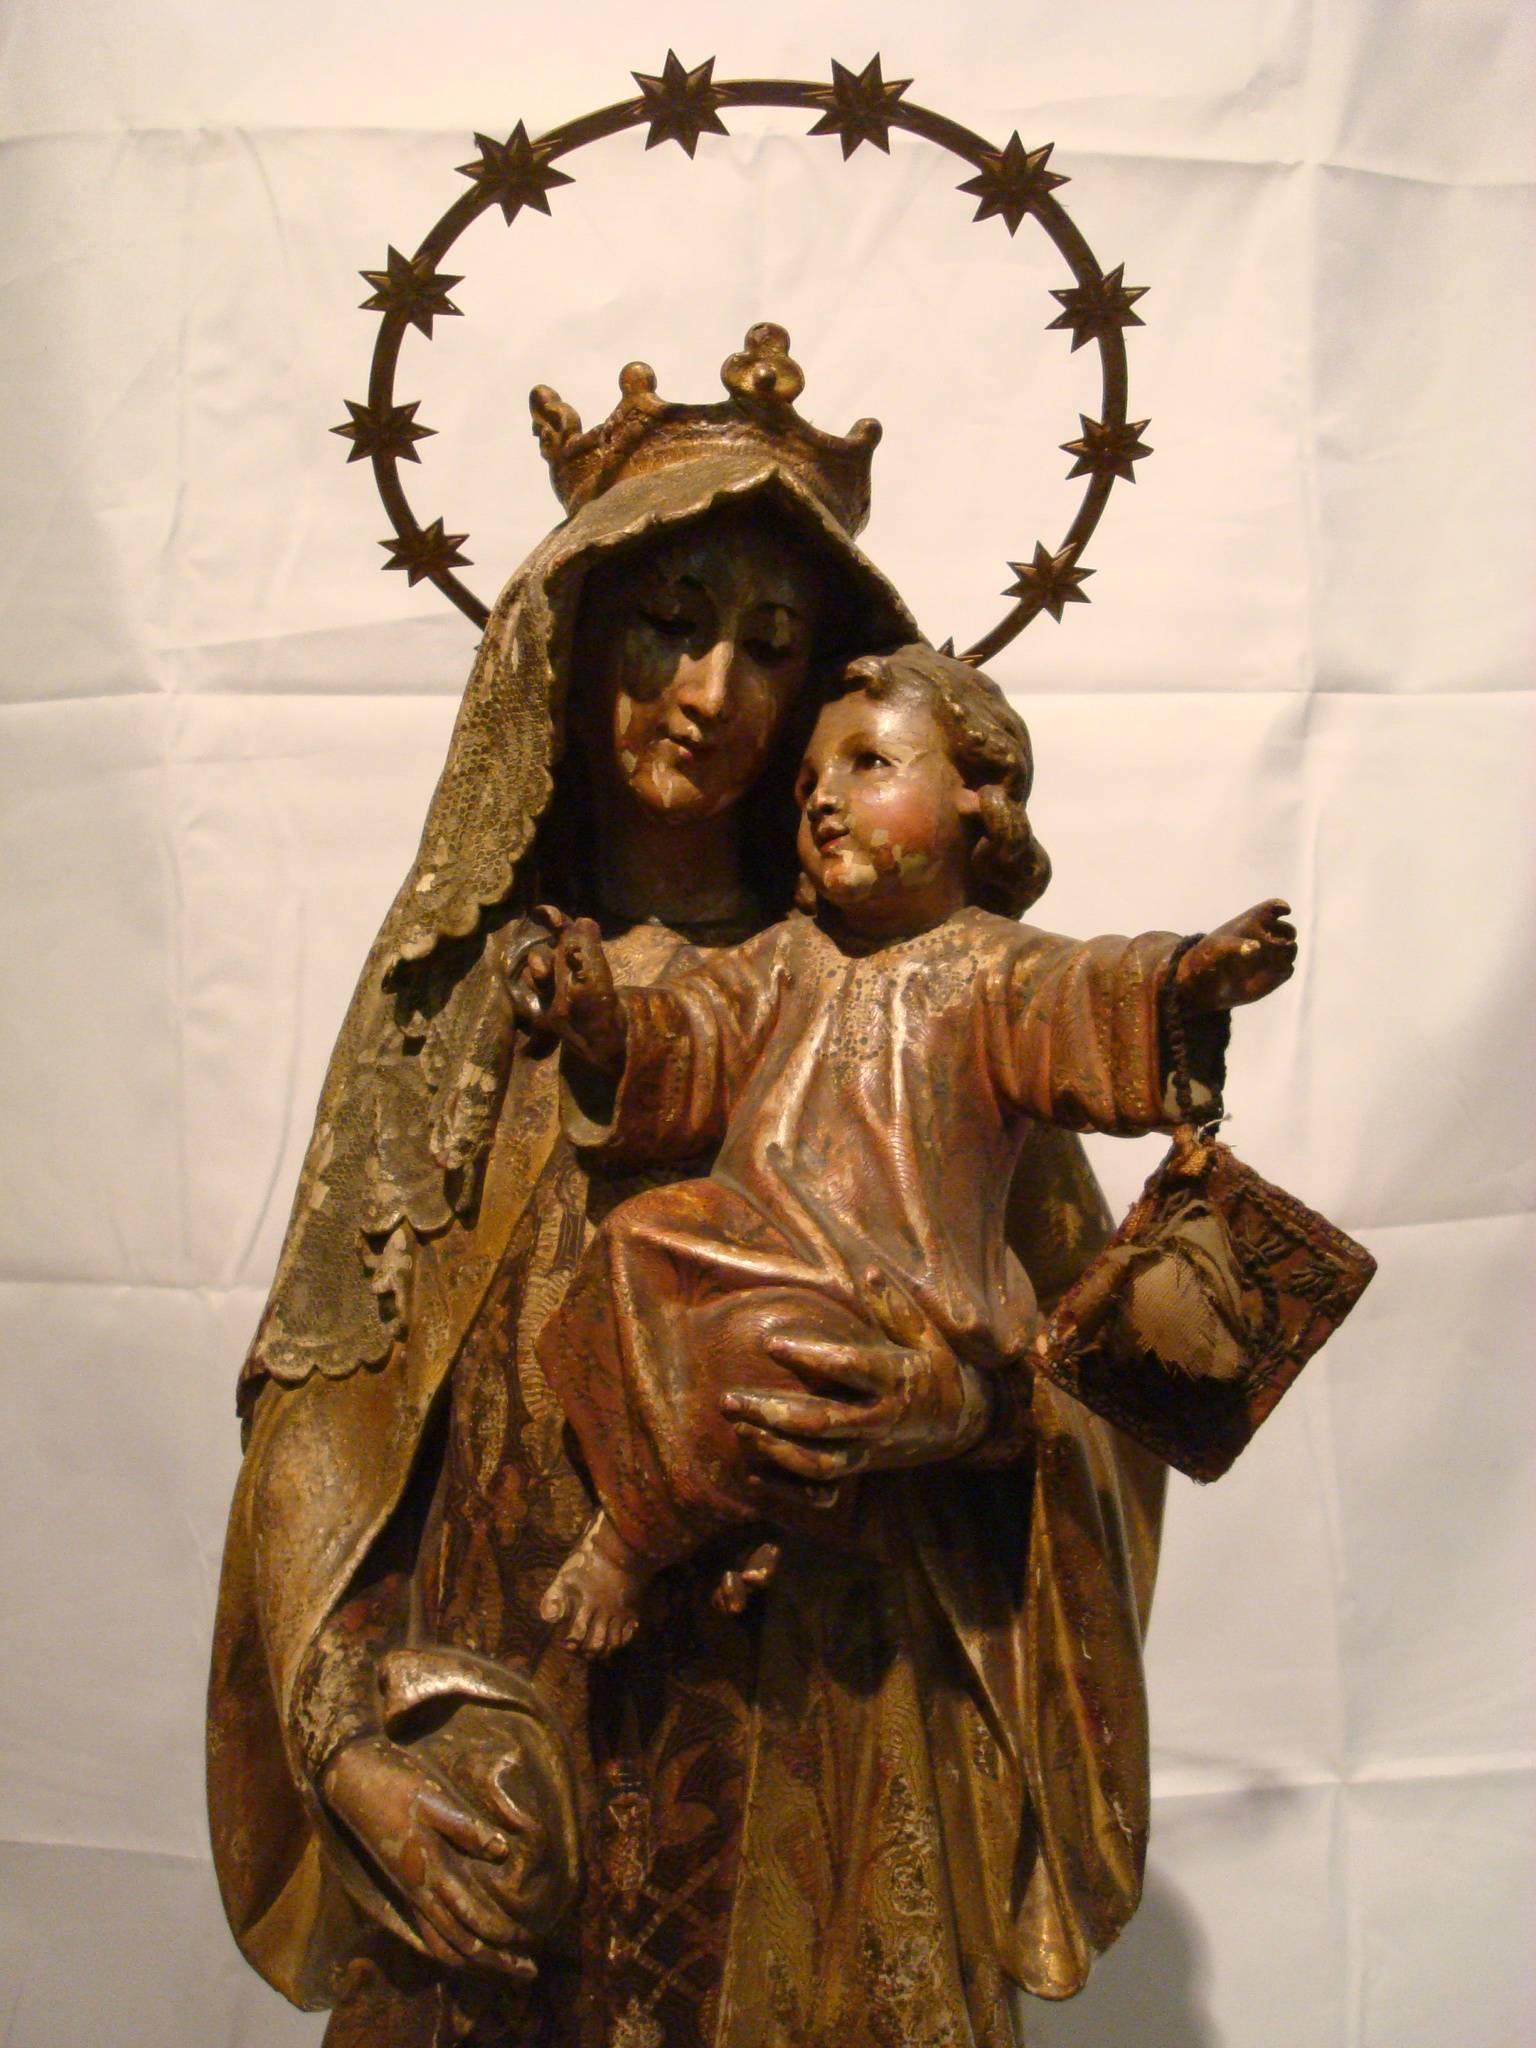 19th Century 19th C. Wooden Sculpture Virgin Mary with Jesus - Wood Carved Polychrome Figure